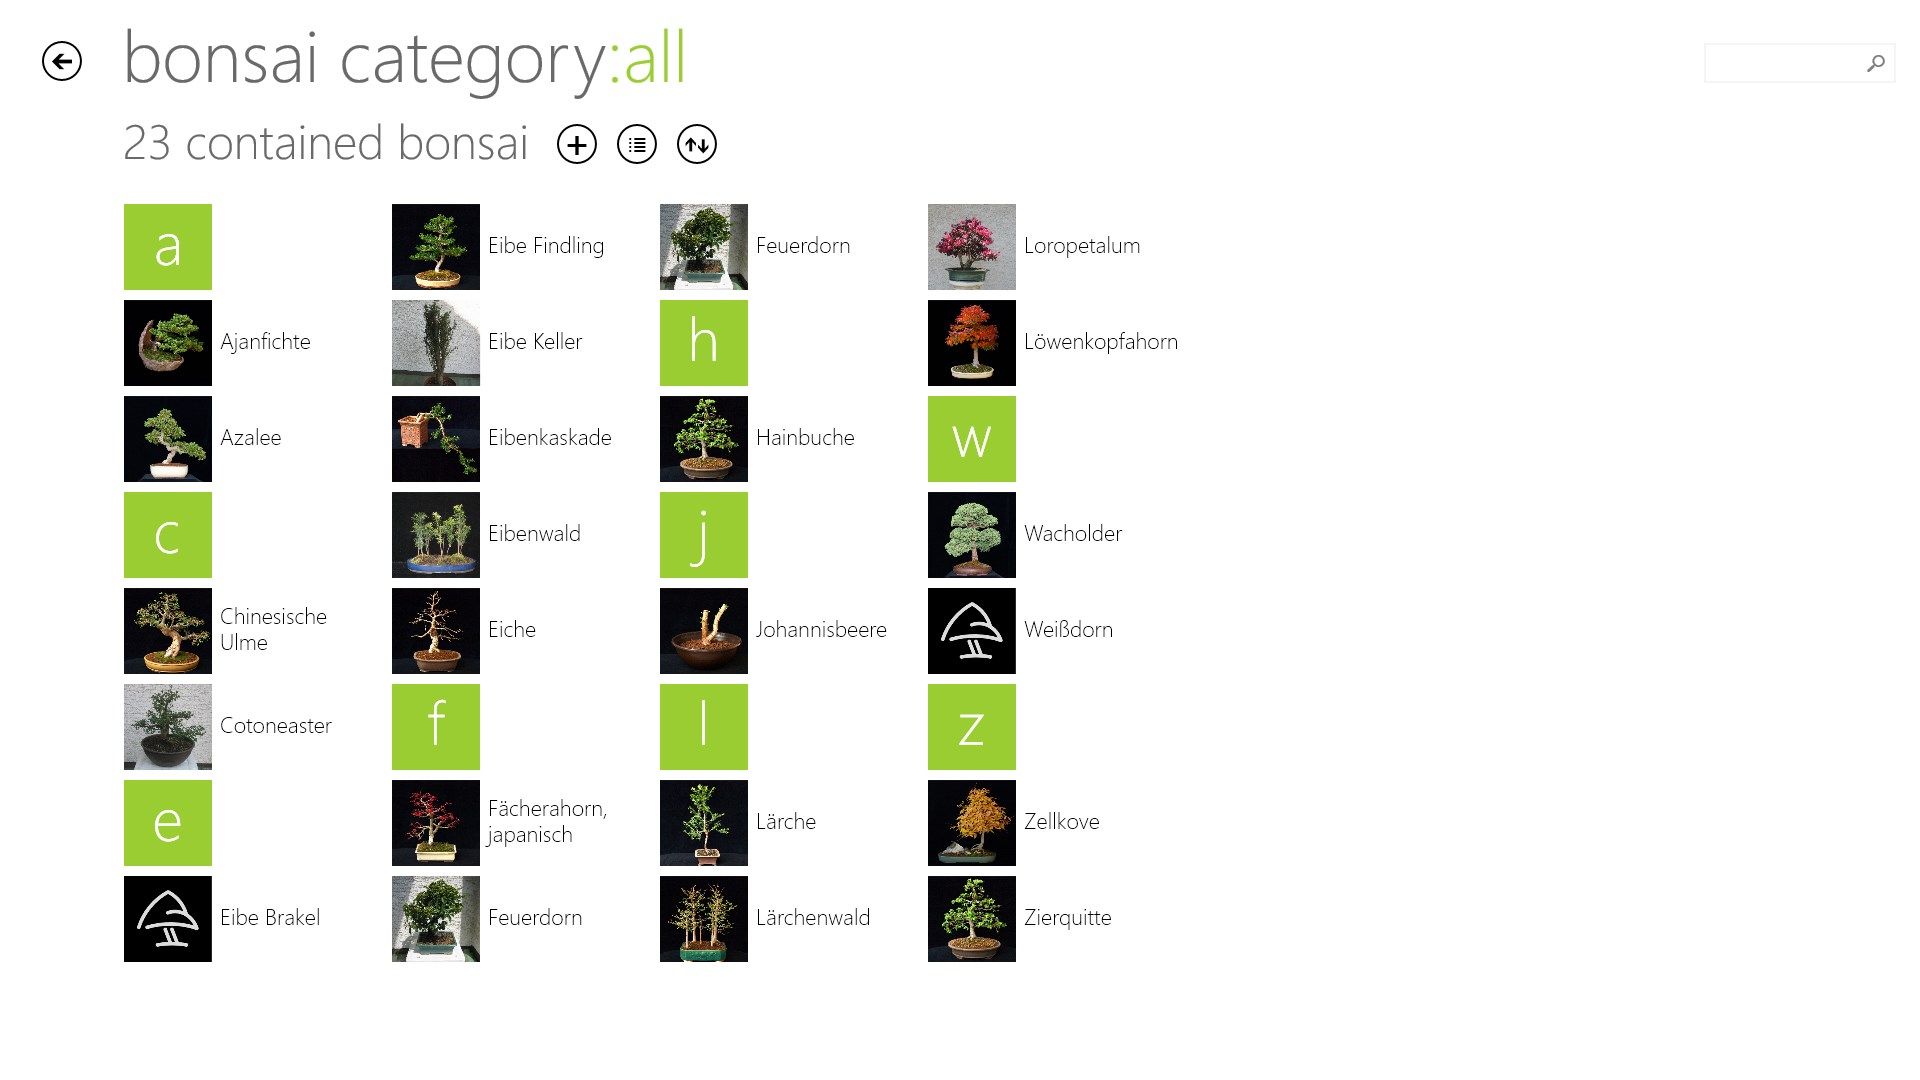 Overview of the bonsai category "all"